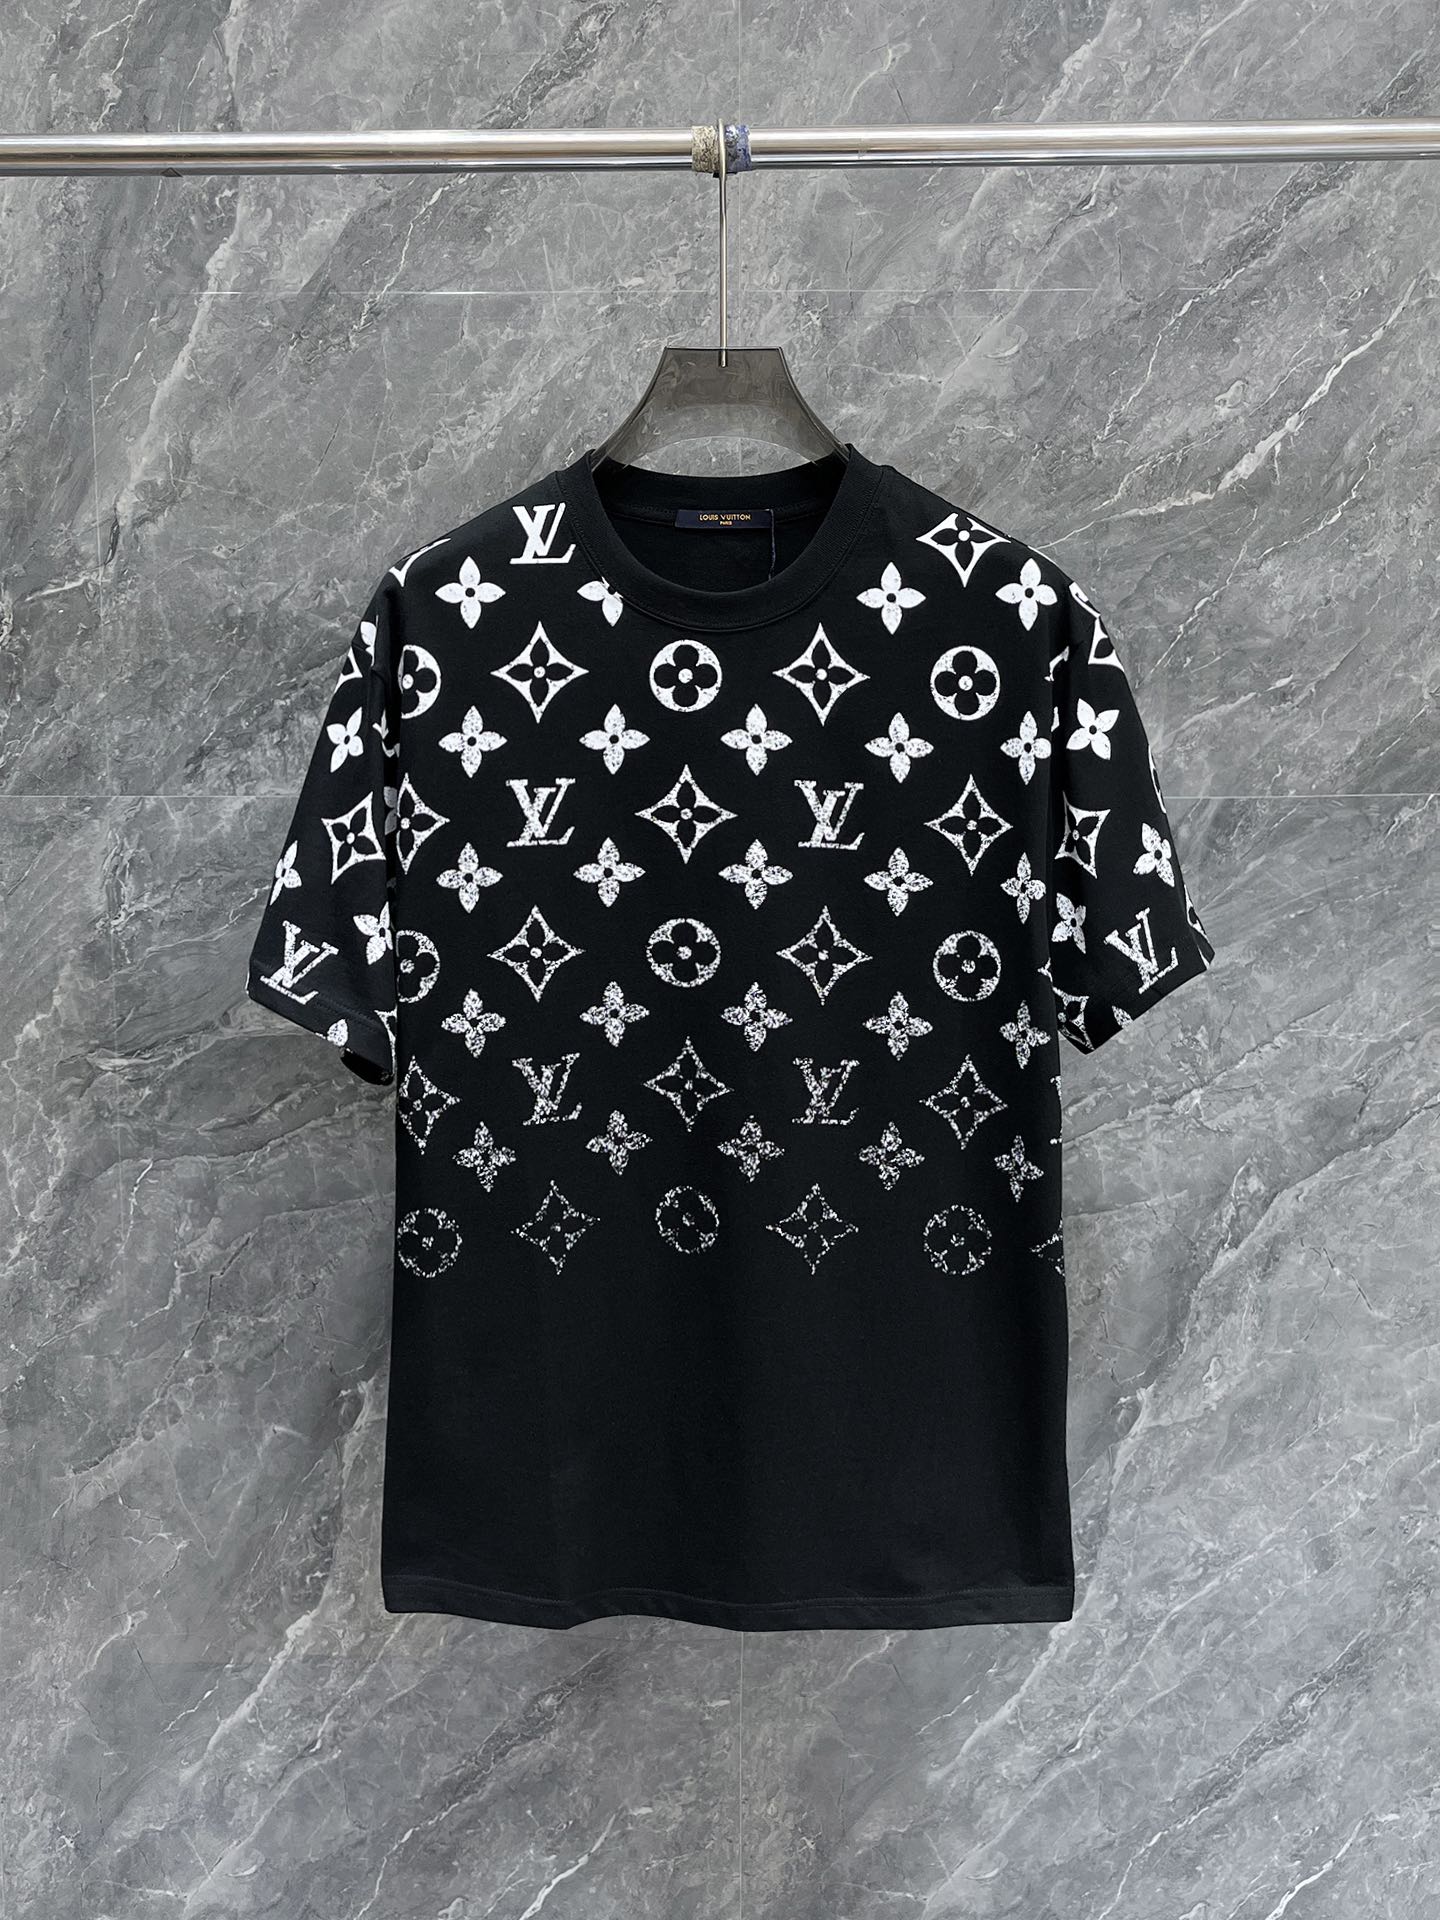 Louis Vuitton Clothing T-Shirt Knockoff Highest Quality
 Black White Printing Cotton Short Sleeve